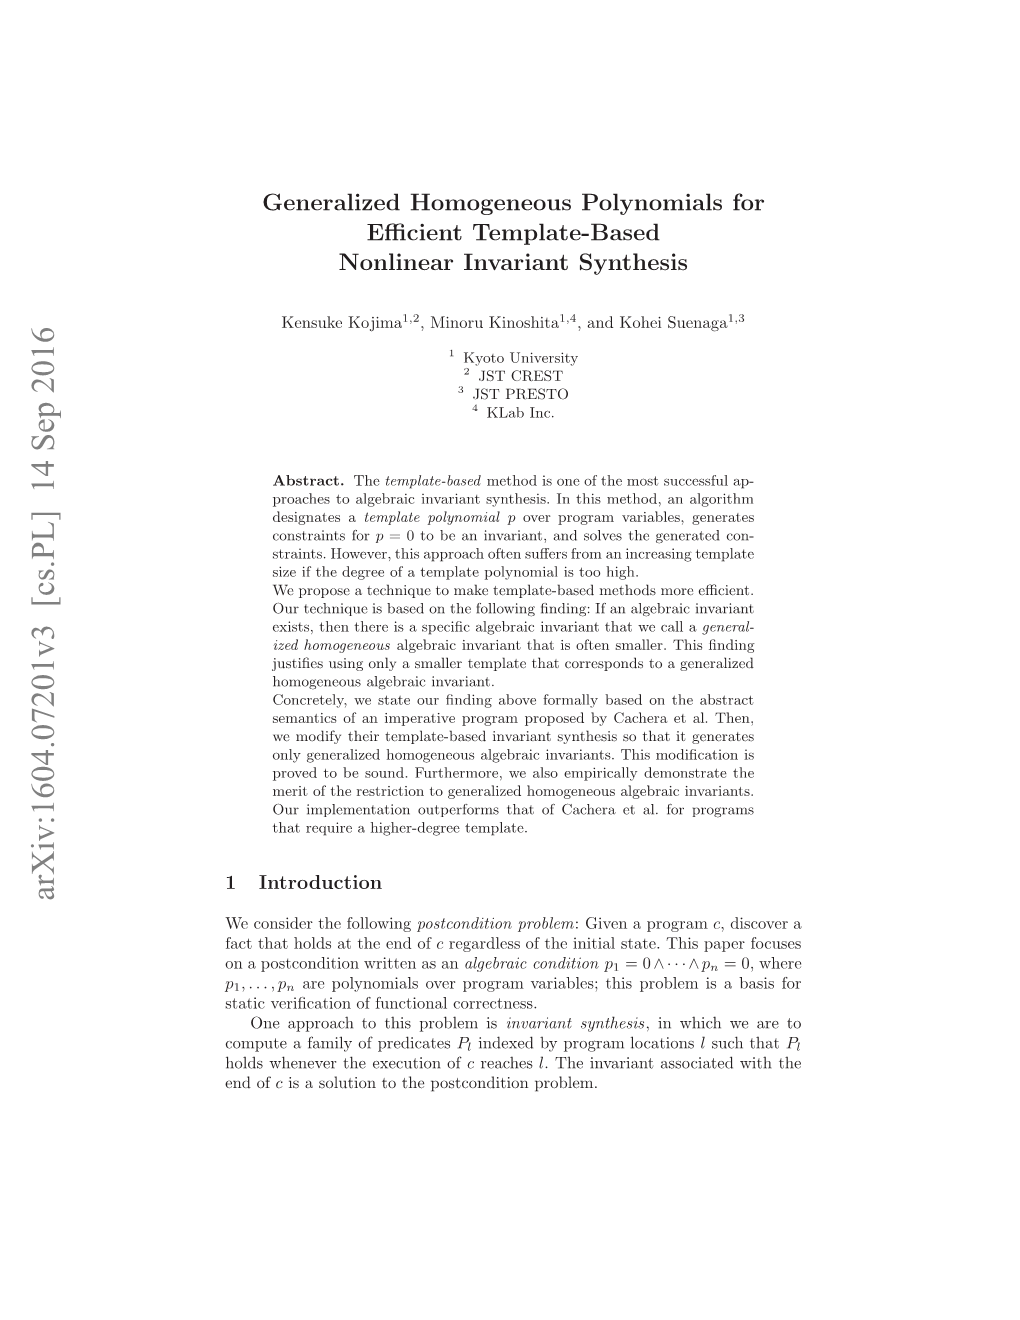 Generalized Homogeneous Polynomials for Efficient Template